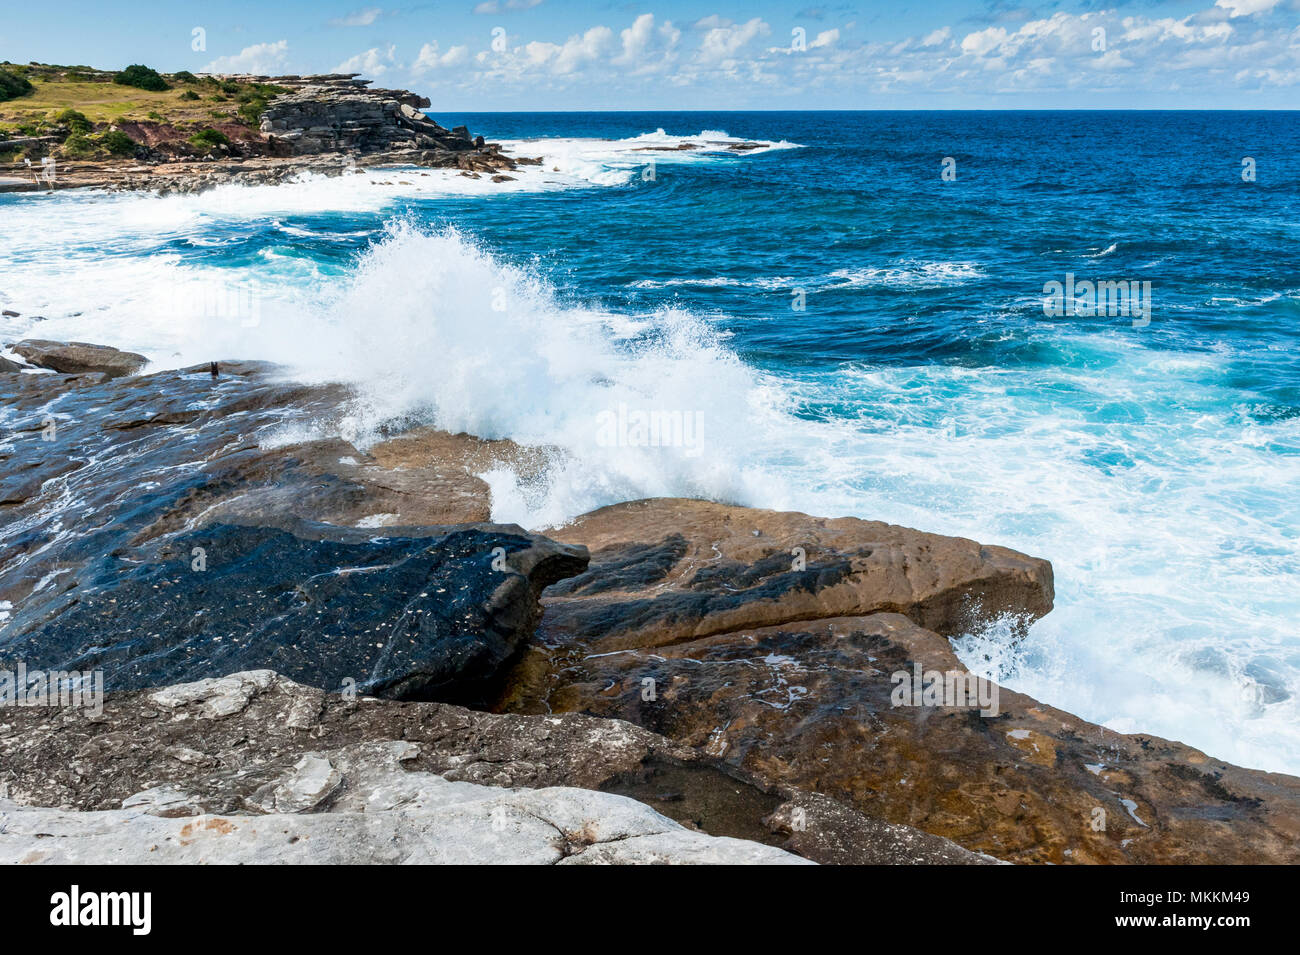 The stunning views along the famous Coogee Beach walk near to Bondi Beach, New South Wales, Australia. Waves crashing on the rocks with a beautiful bl Stock Photo